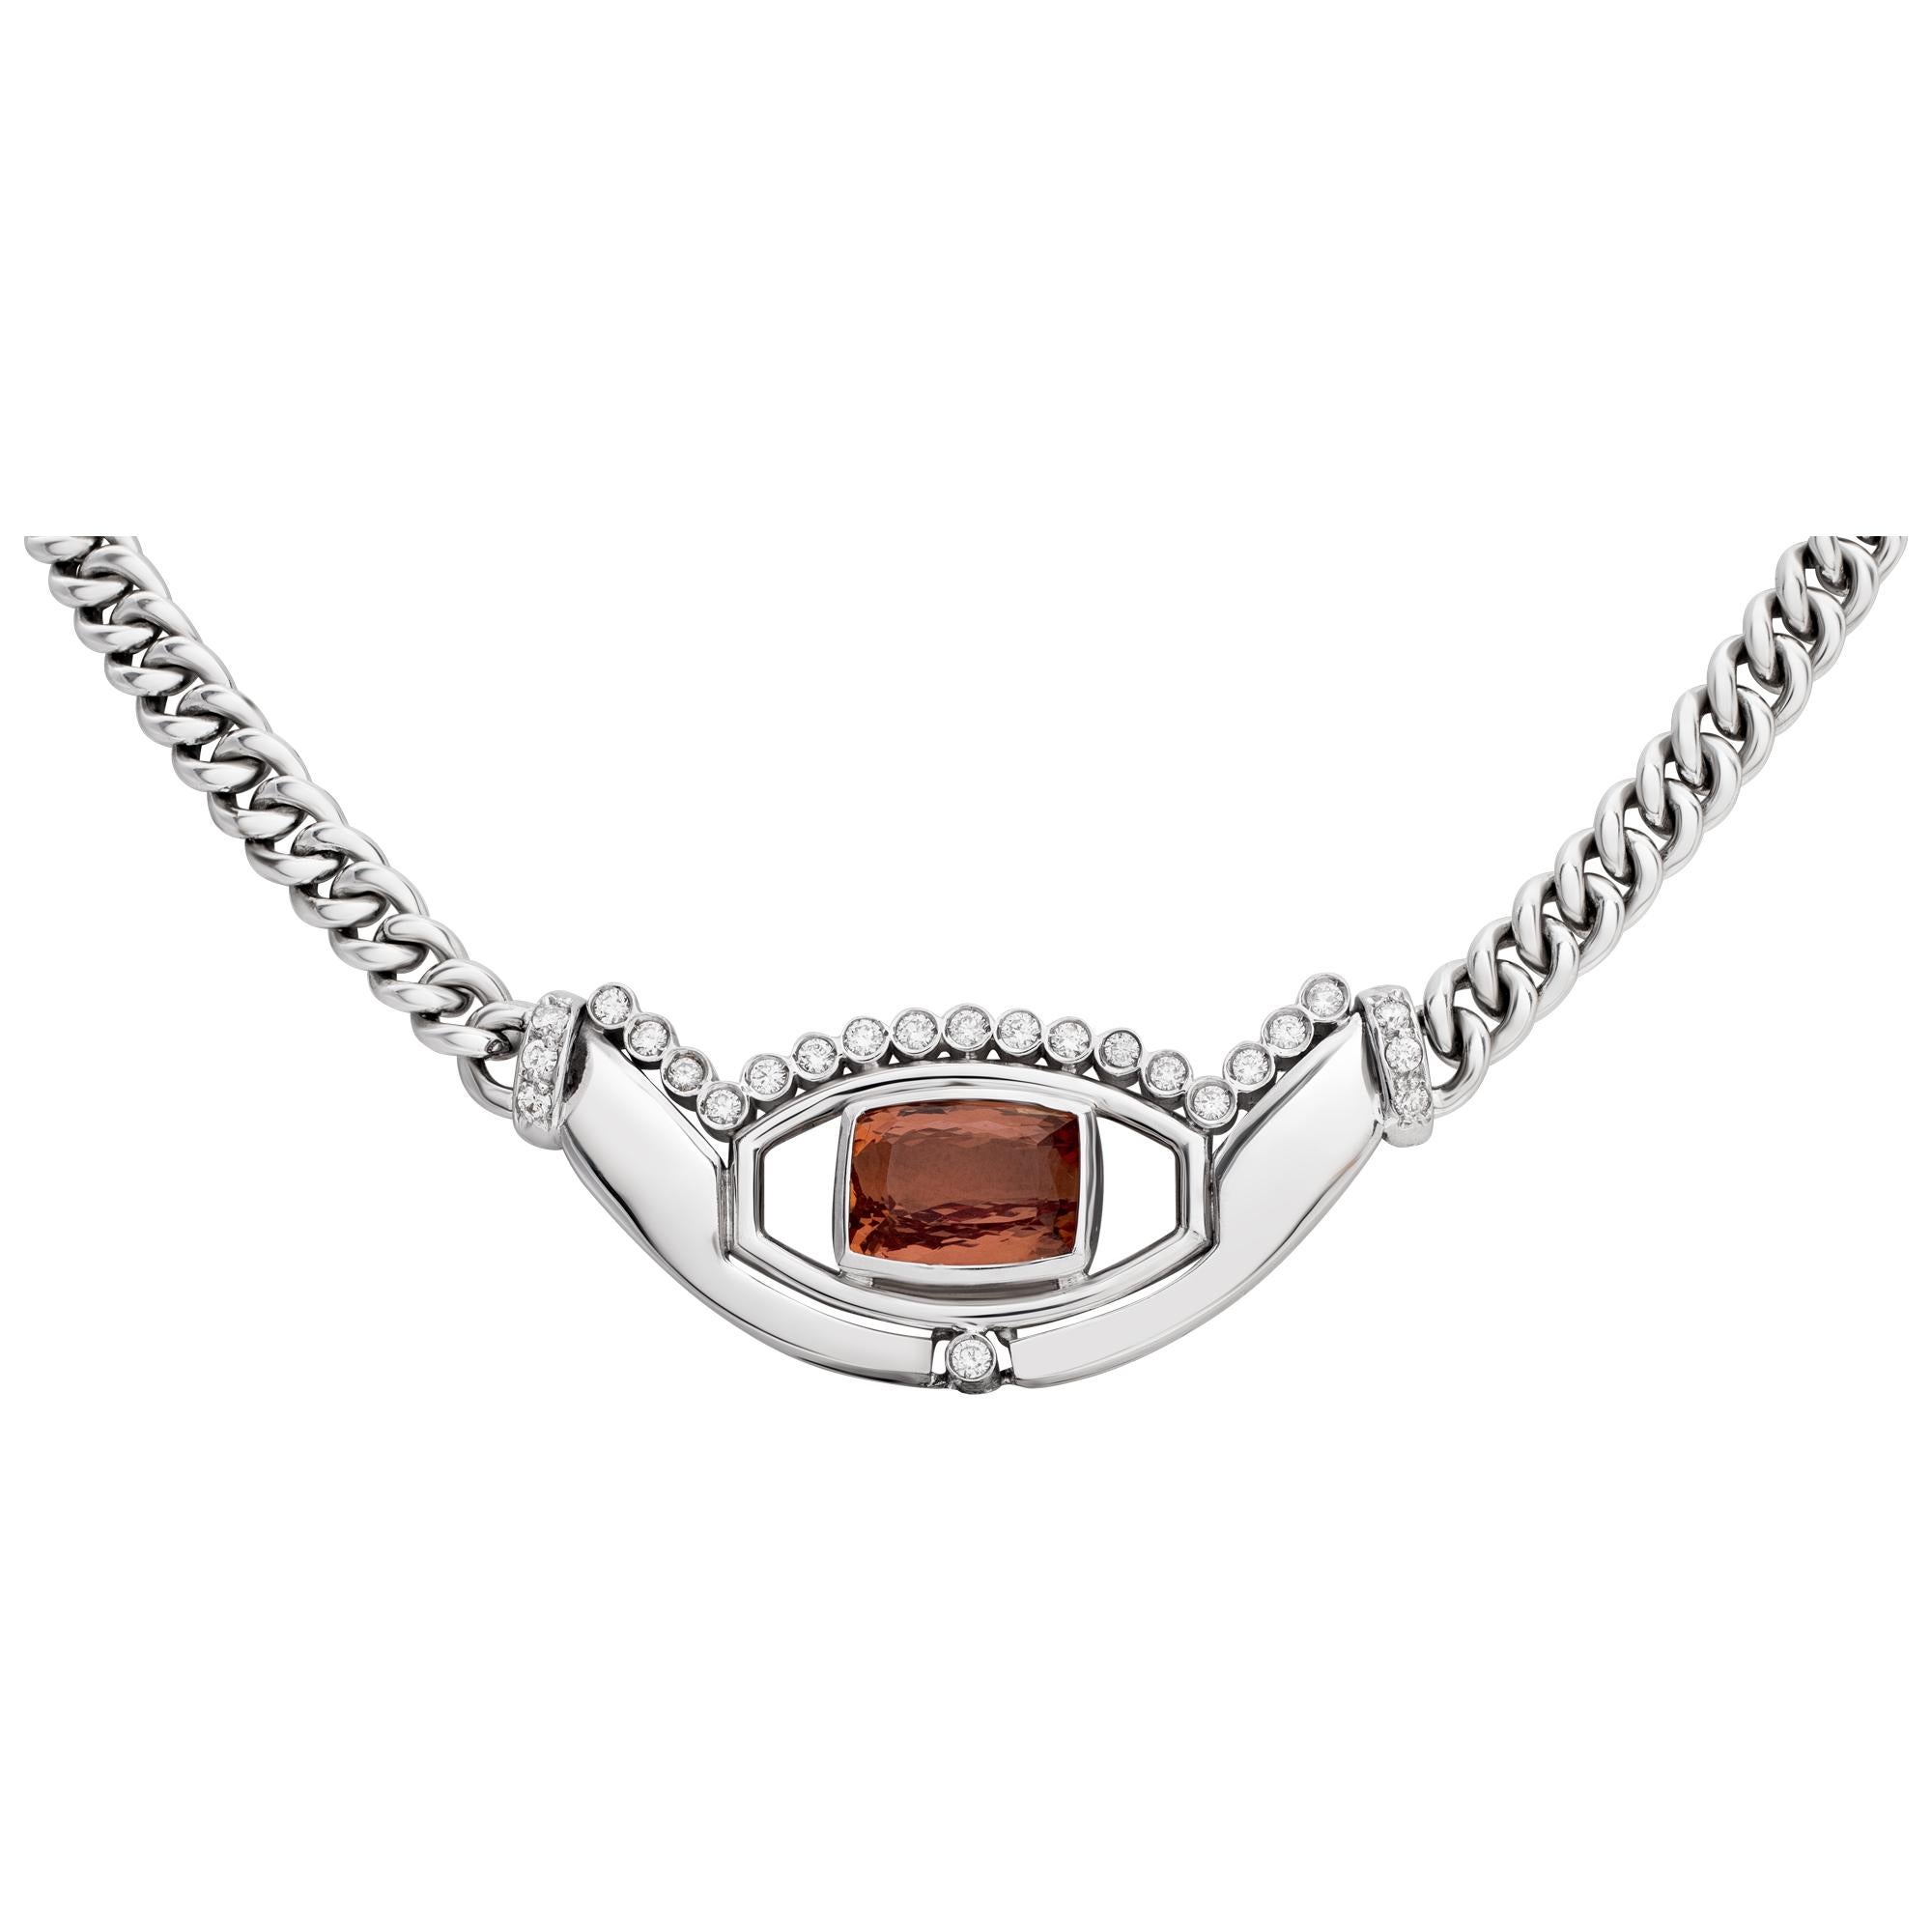 Brilliant cushion cut Imperial Topaz  & diamonds necklace set in 18k white gold. Round brilliant cut diamonds total approx weitght: 1.00 carat, estimate: G-H color, VS clarity. Imperial Topaz approx weight over 4 carat . Length 16 inches.